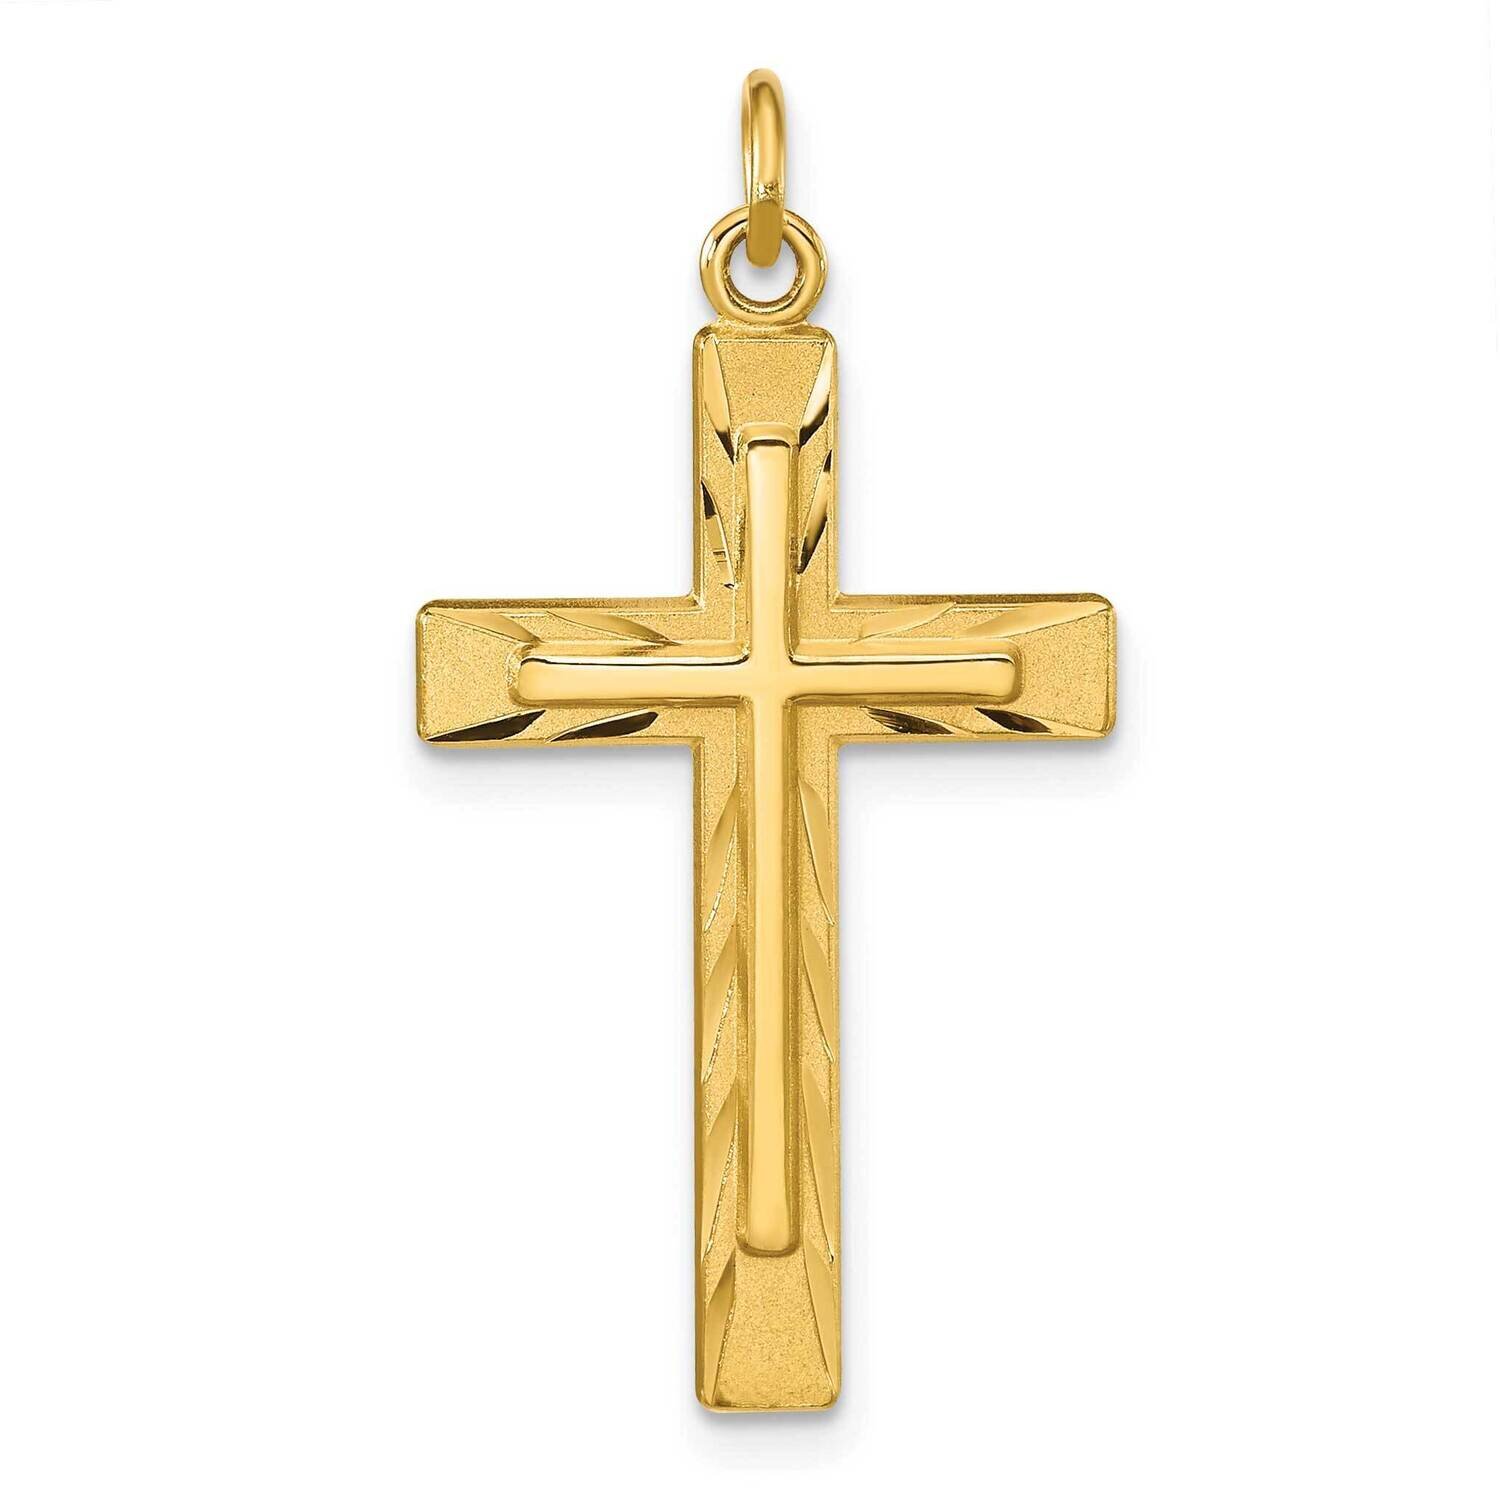 Polished and Satin Diamond-Cut Cross Pendant Sterling Silver Gold-Plated QC11116